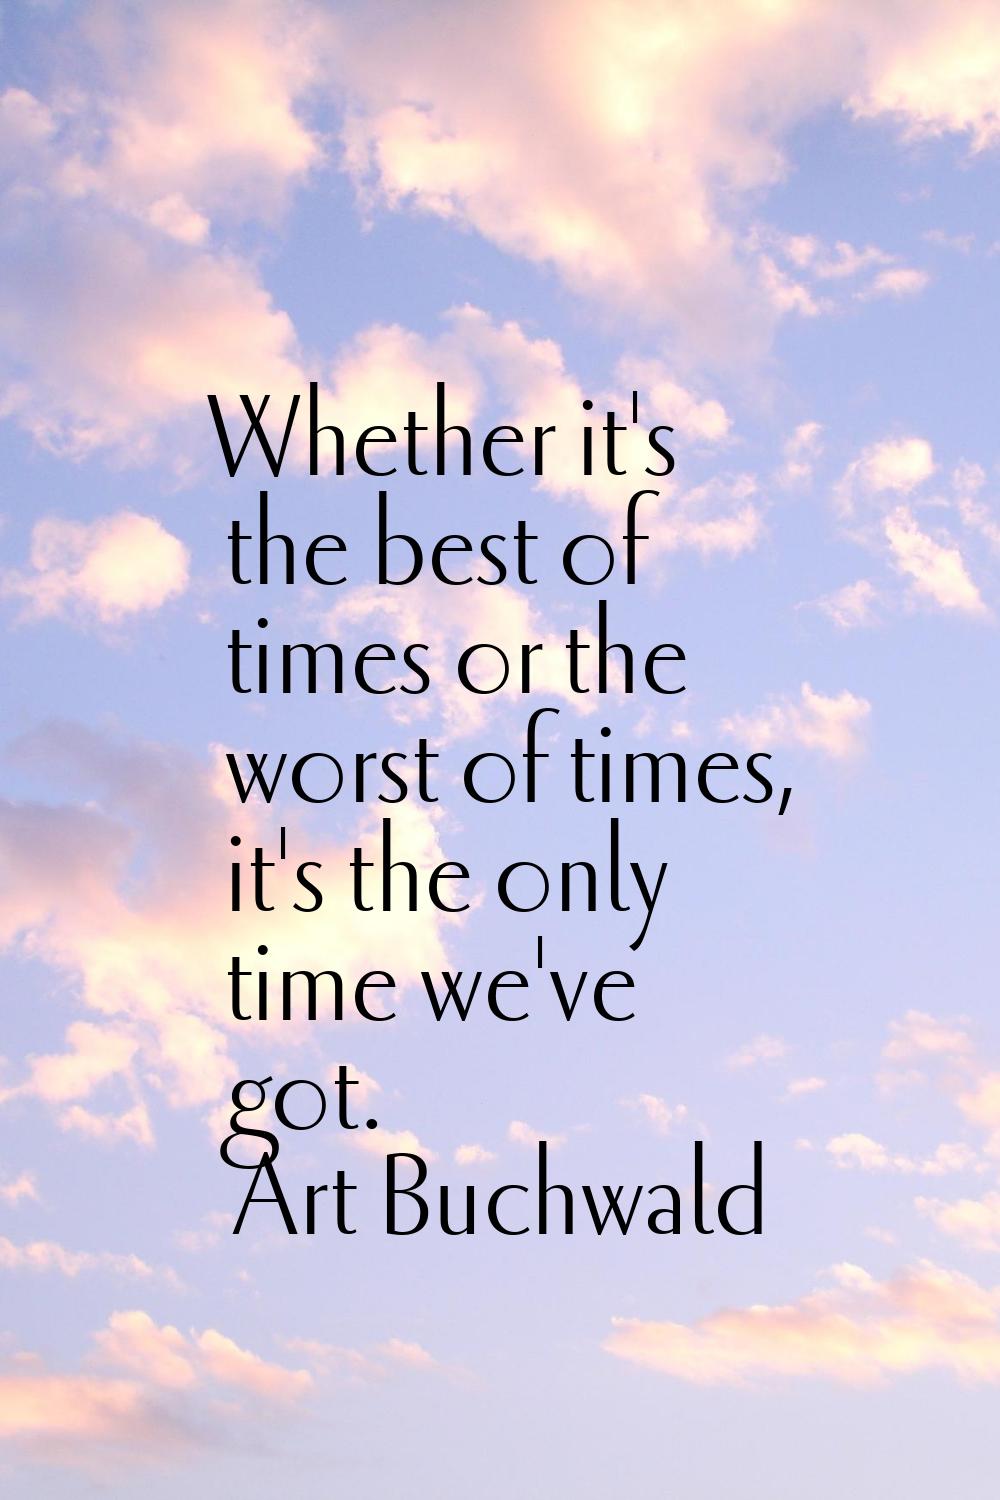 Whether it's the best of times or the worst of times, it's the only time we've got.